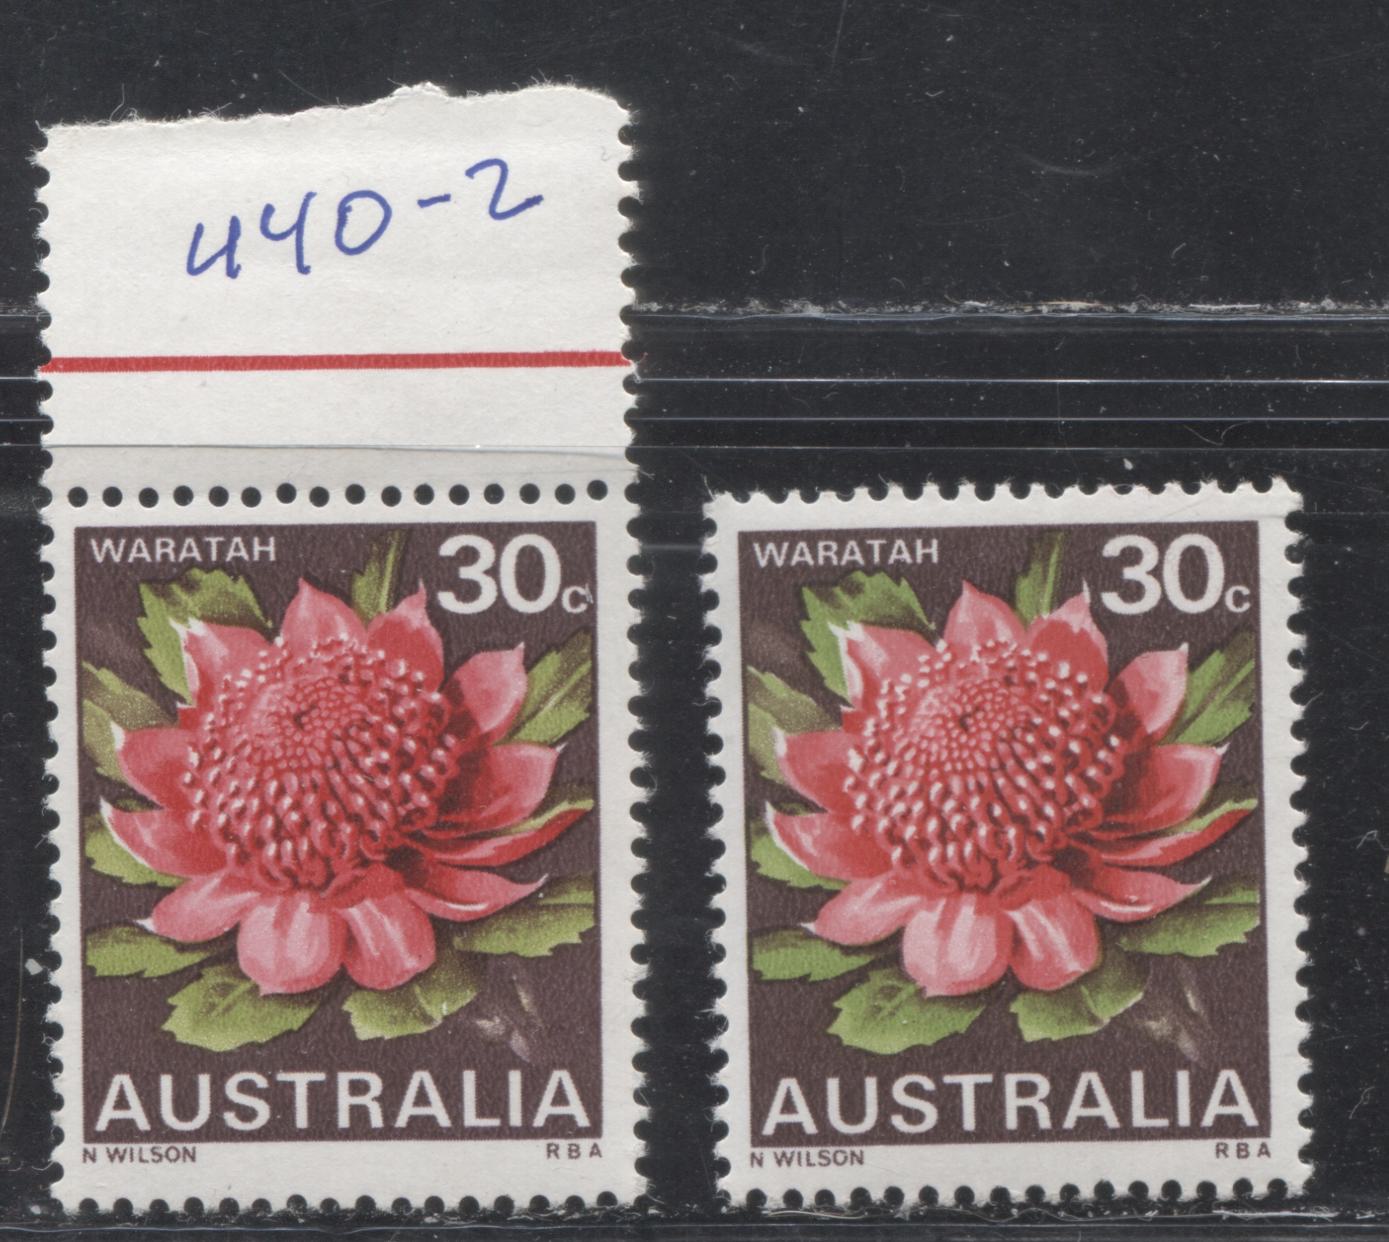 Australia #439 (SG#425-425b) 30c Waratah 1968-1971 Floral Definitives, VFNH Examples of Types 1 and 2